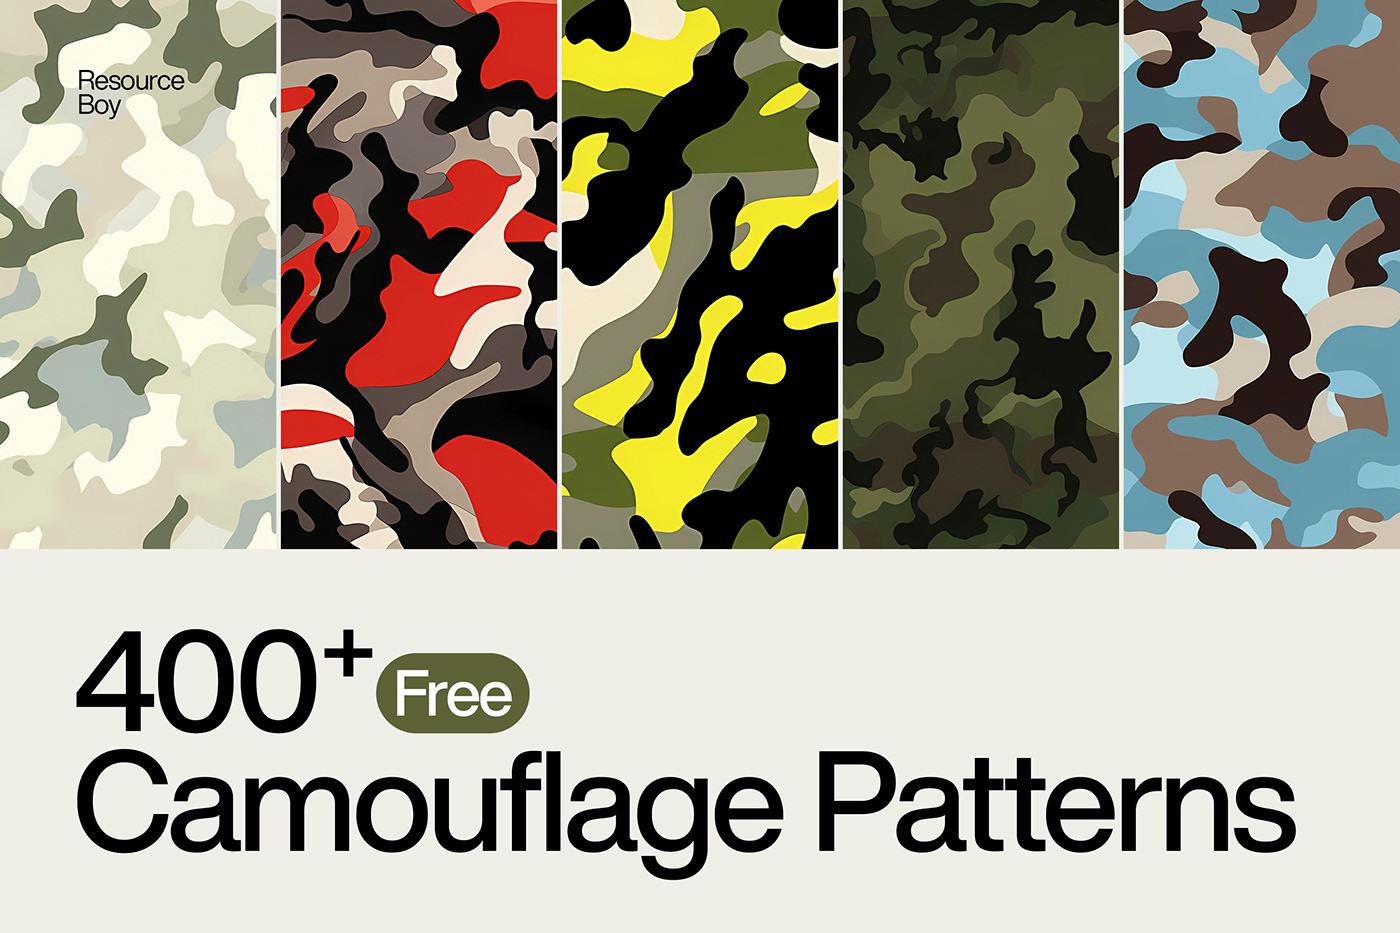 Patterns free download camouflage army Military War free pattern seamless textures